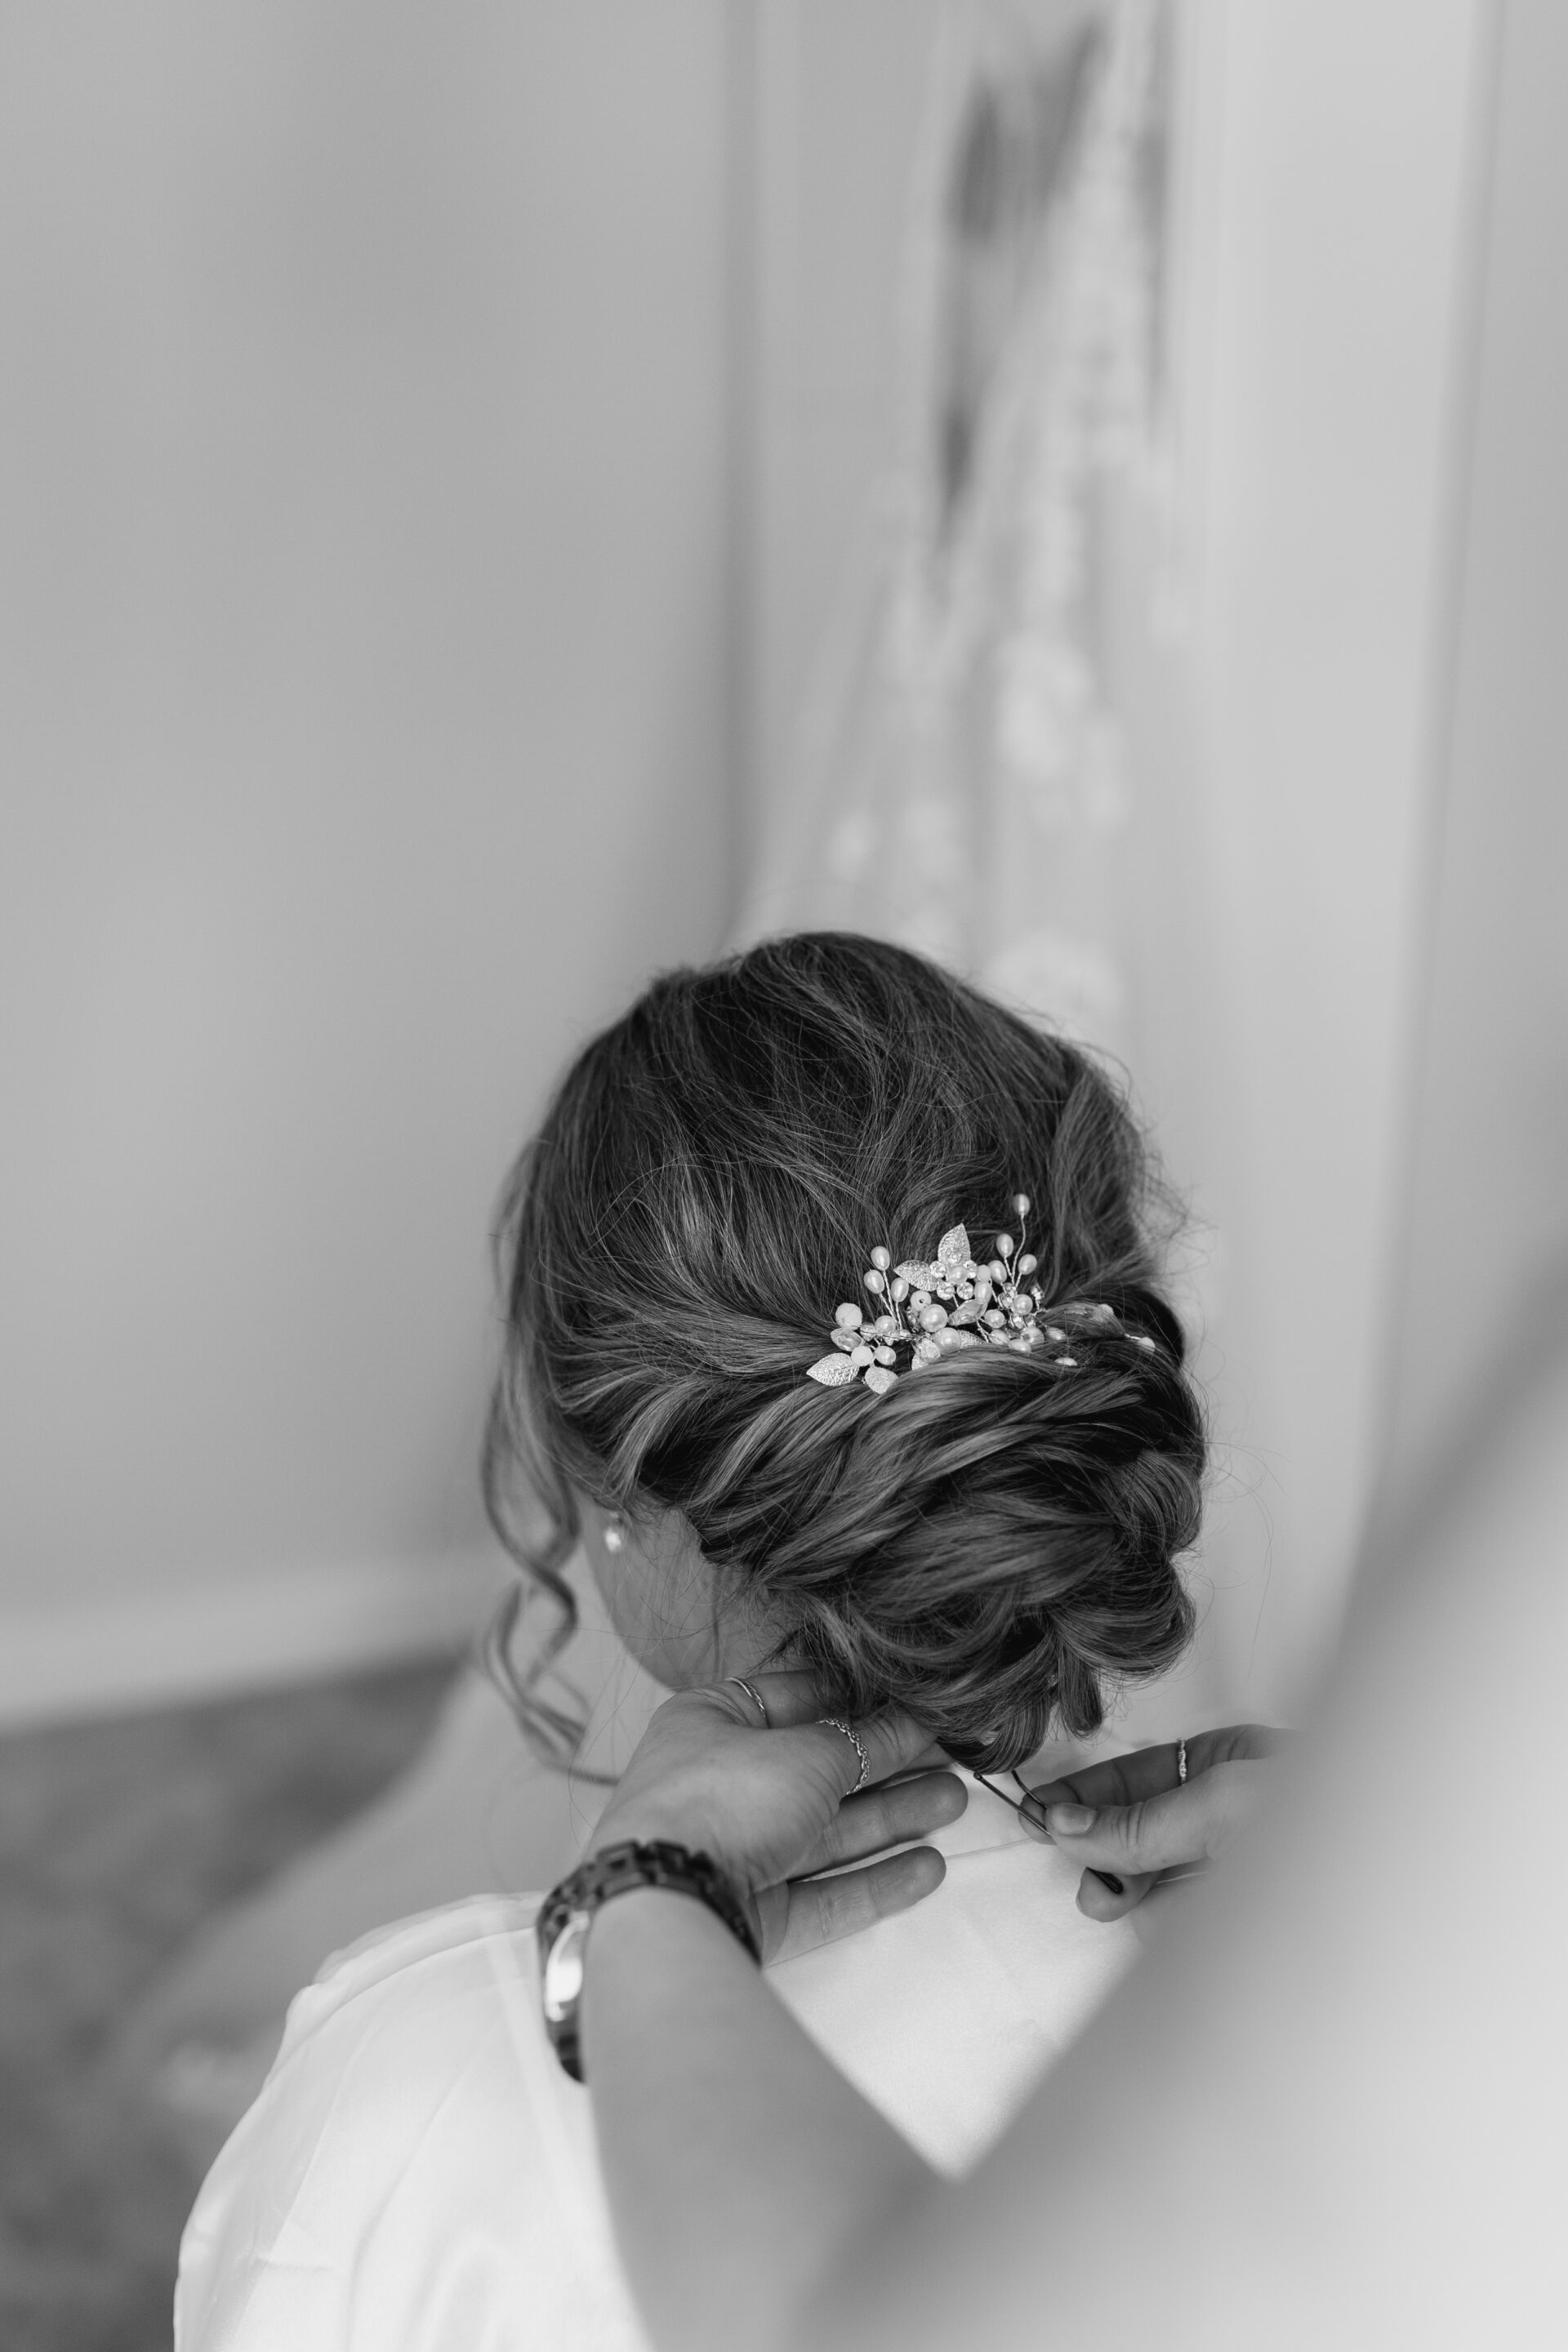 Finishing touches are made to the bride's elegant bridal hair up do